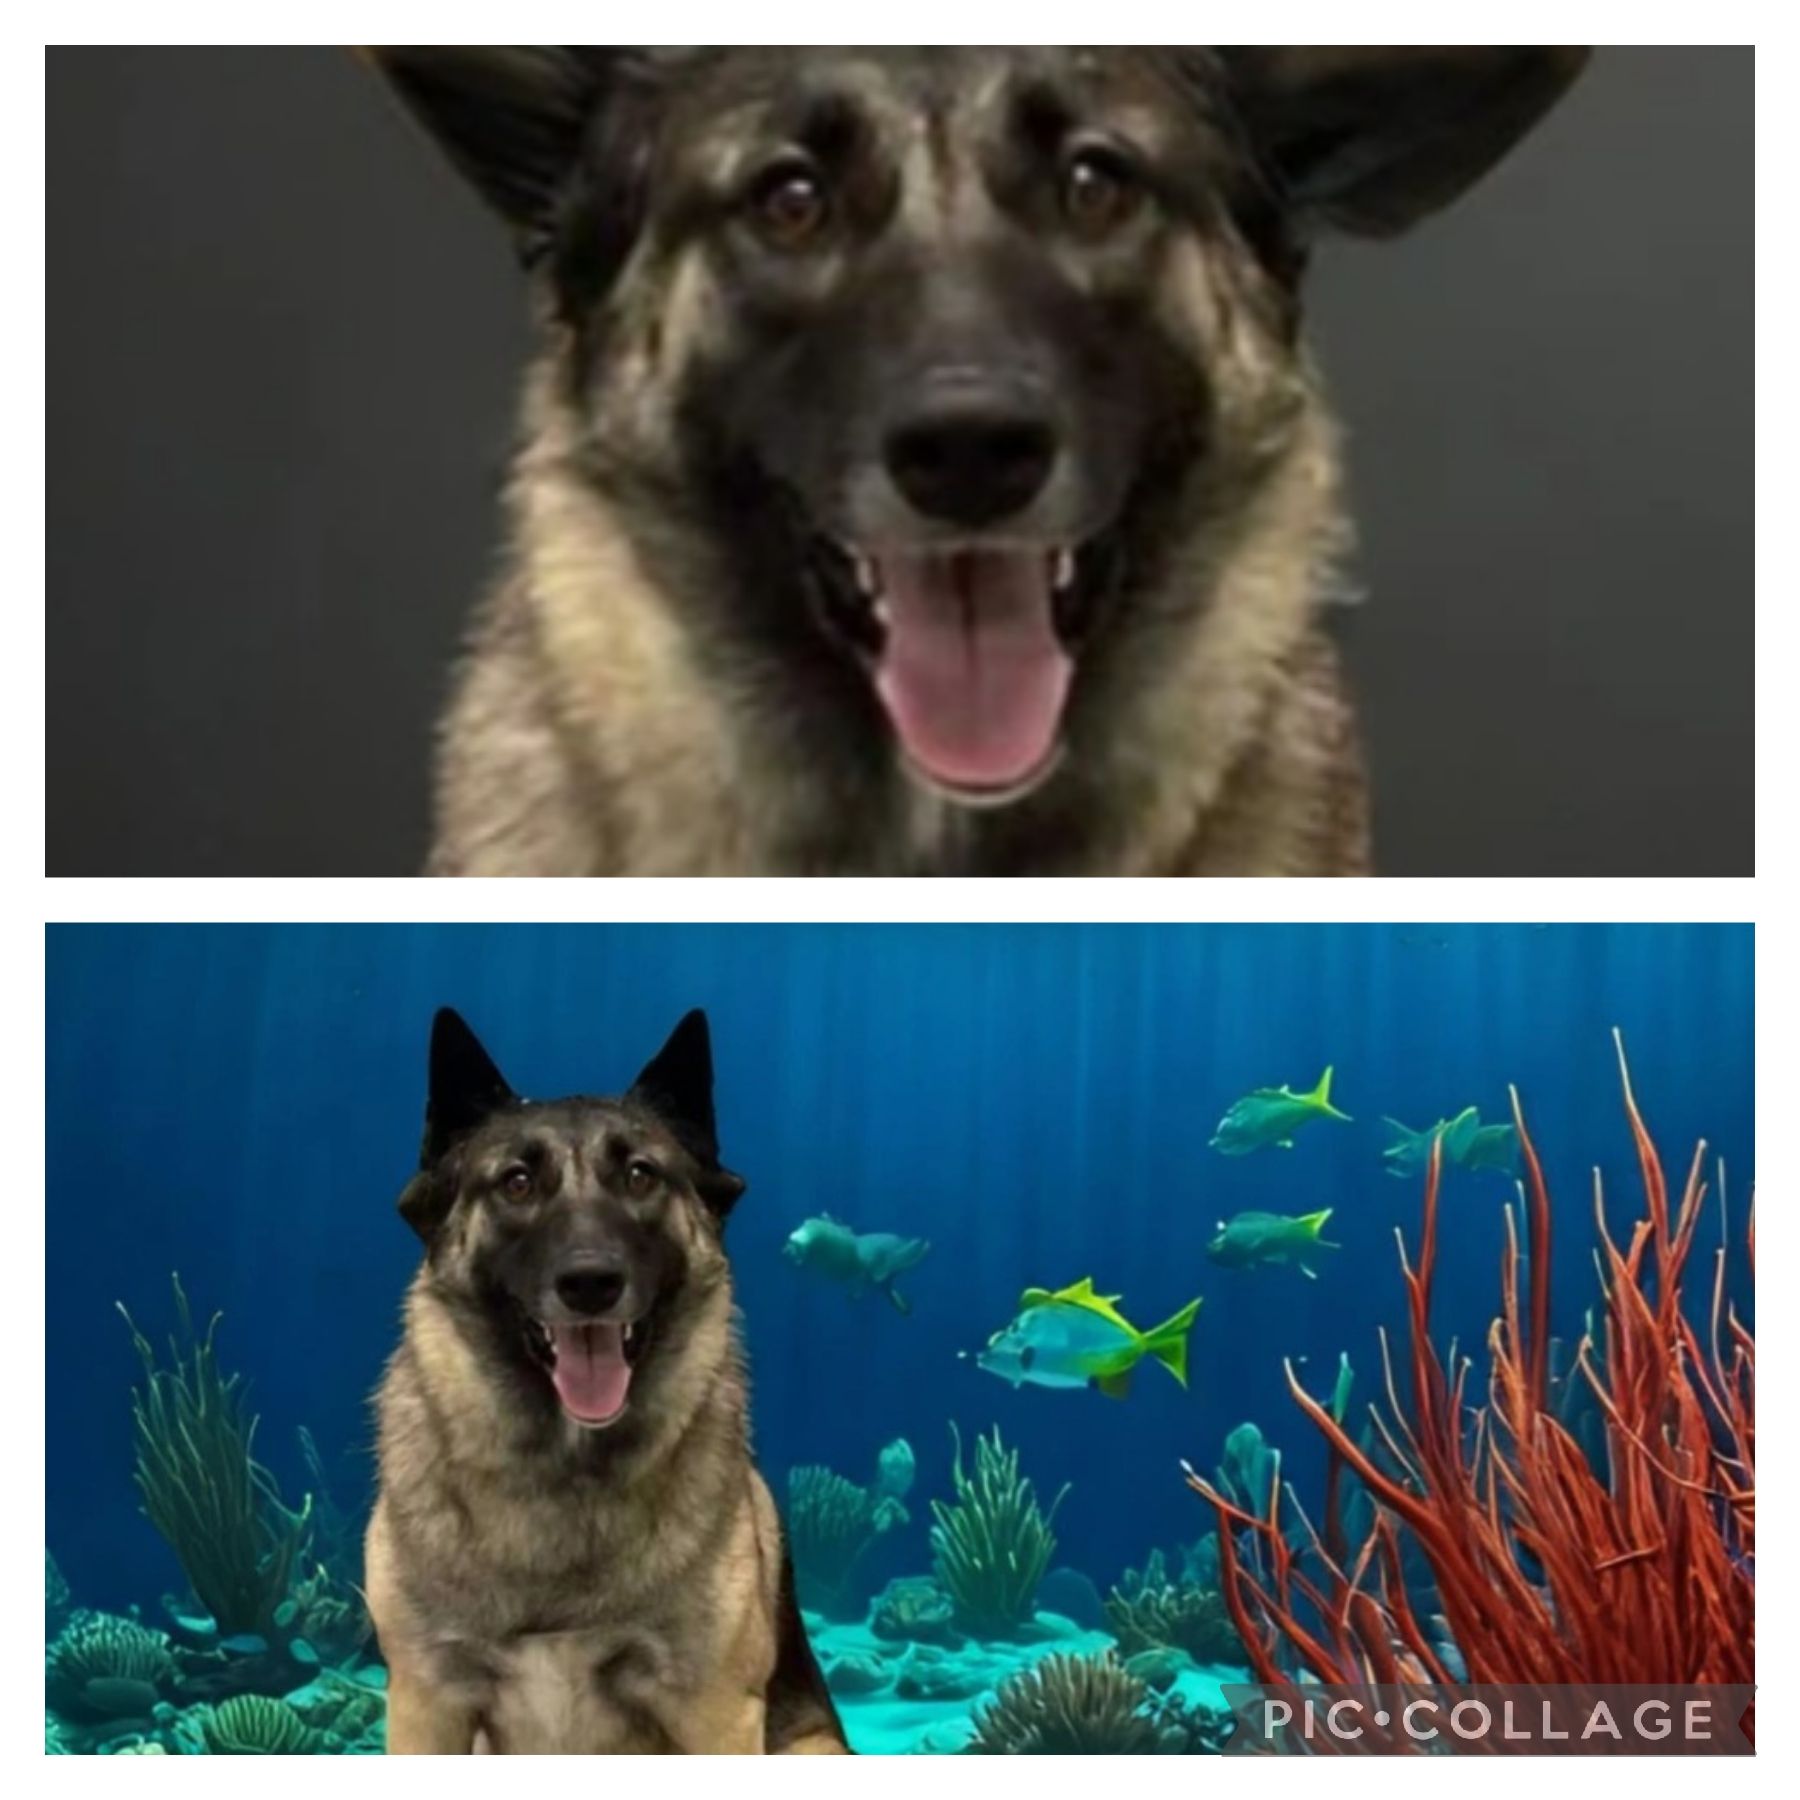 A picture of a dog next to a picture of a fish tank